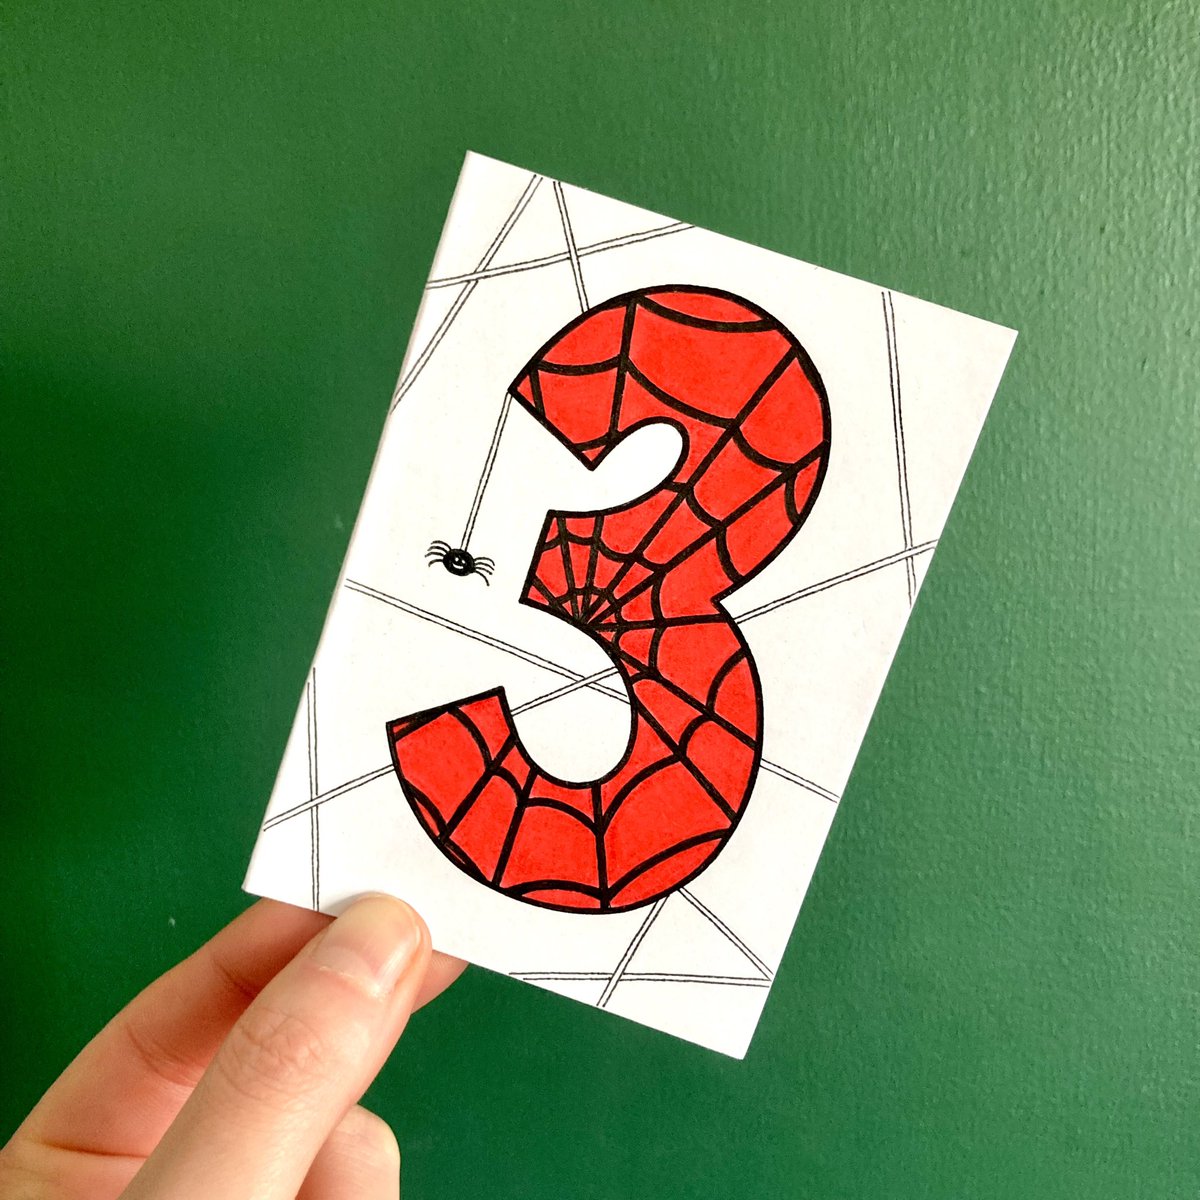 What more could you want turning 3 than a card to match your trainers? 🕷️🕸️

#handdrawn #birthday #card #carddesign #spiderman #web #fineart #oneofakind #madetoorder #unique #custom #art #design